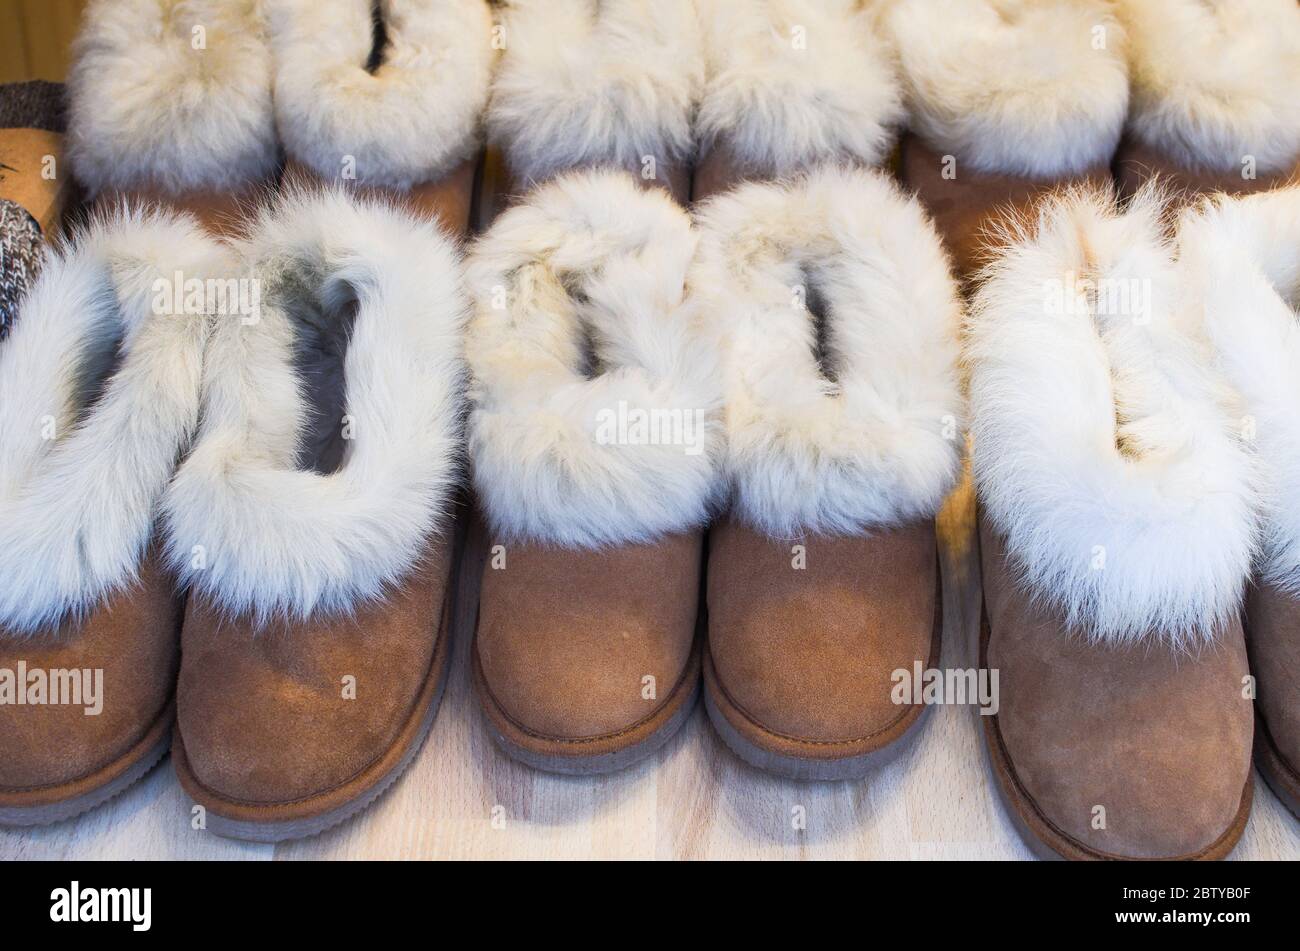 natural shoe store uggs - virelaine 